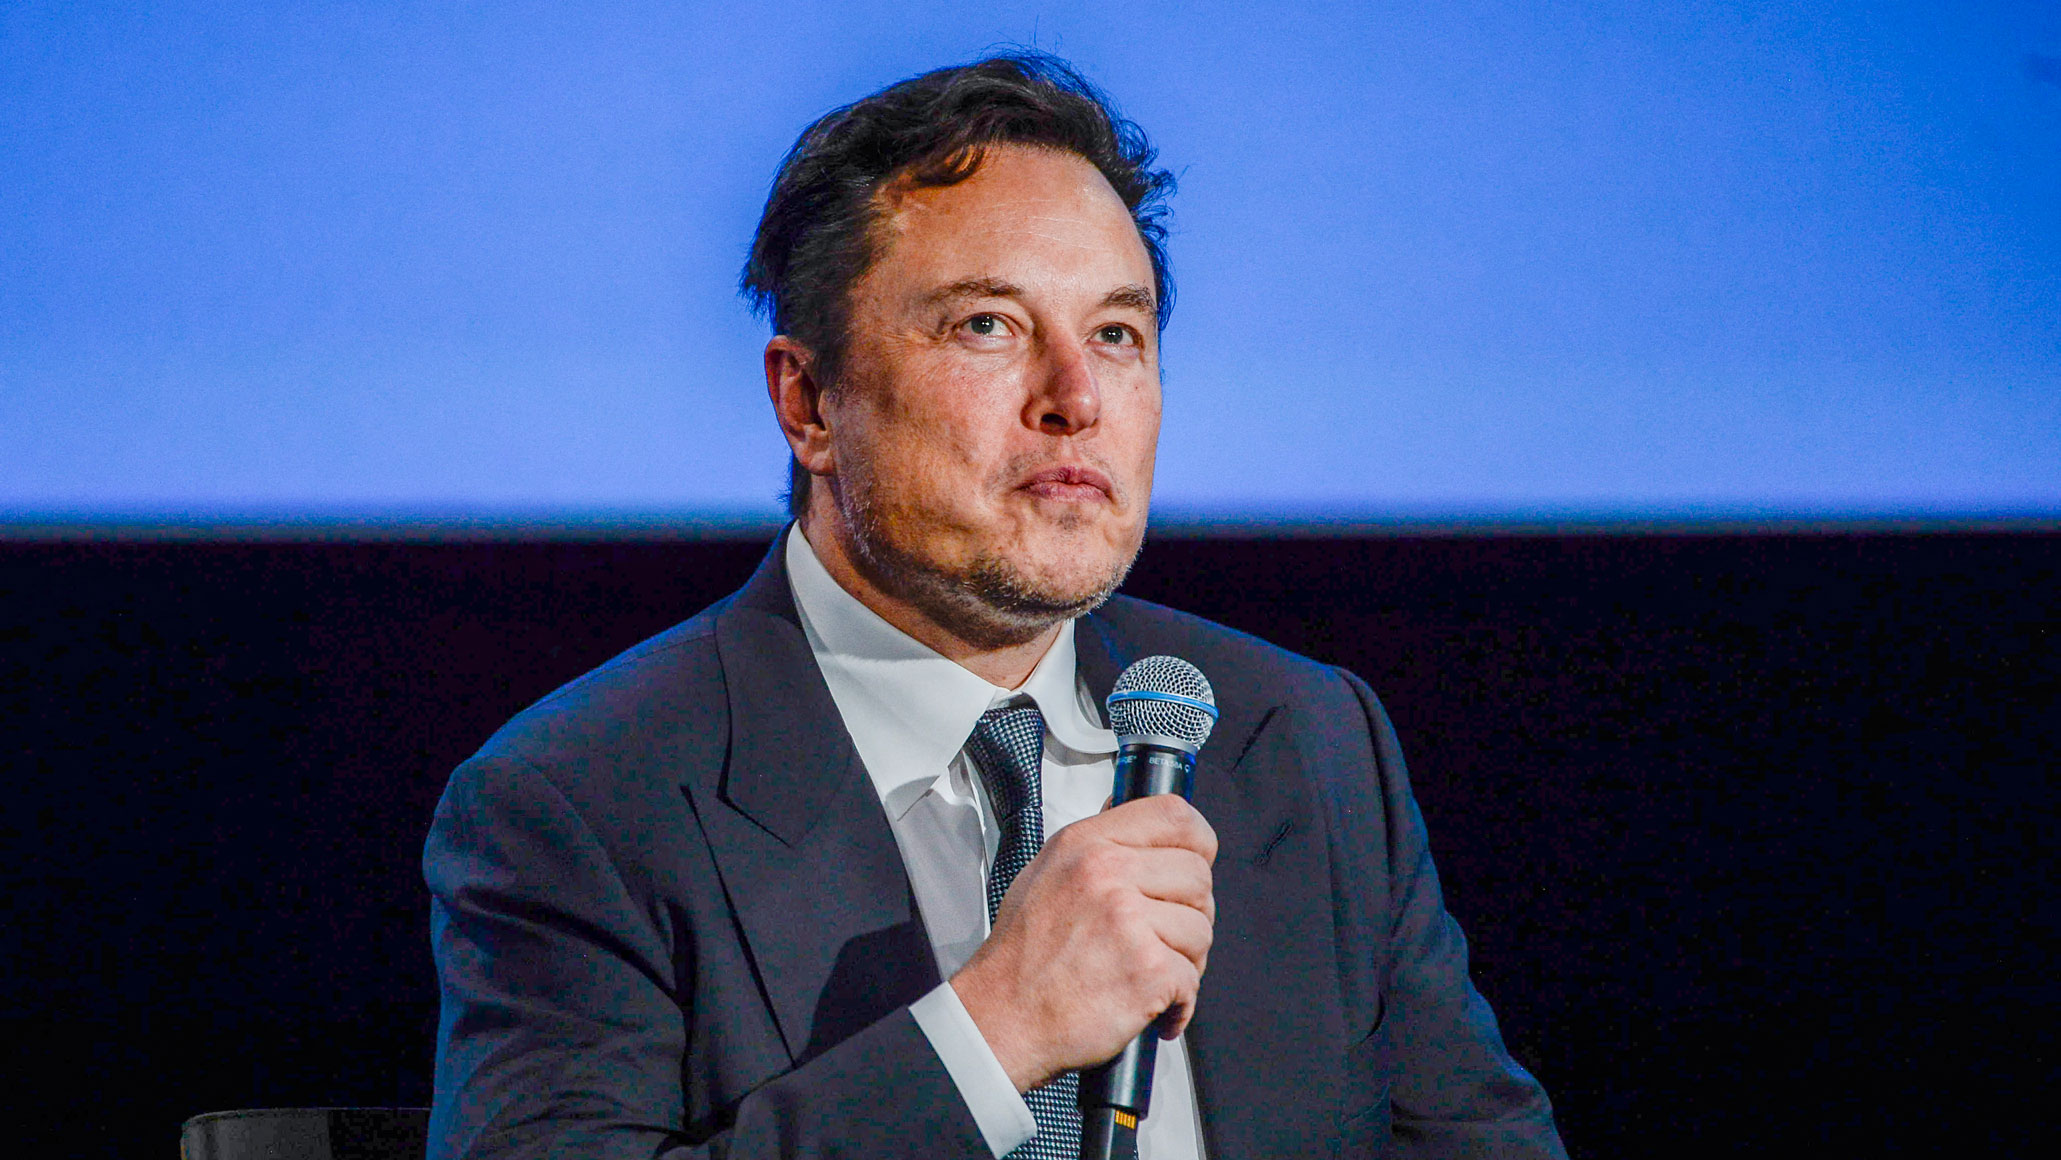 Tesla CEO Elon Musk looks up as he addresses guests at the Offshore Northern Seas 2022 (ONS) meeting in Stavanger, Norway, on August 29, 2022.